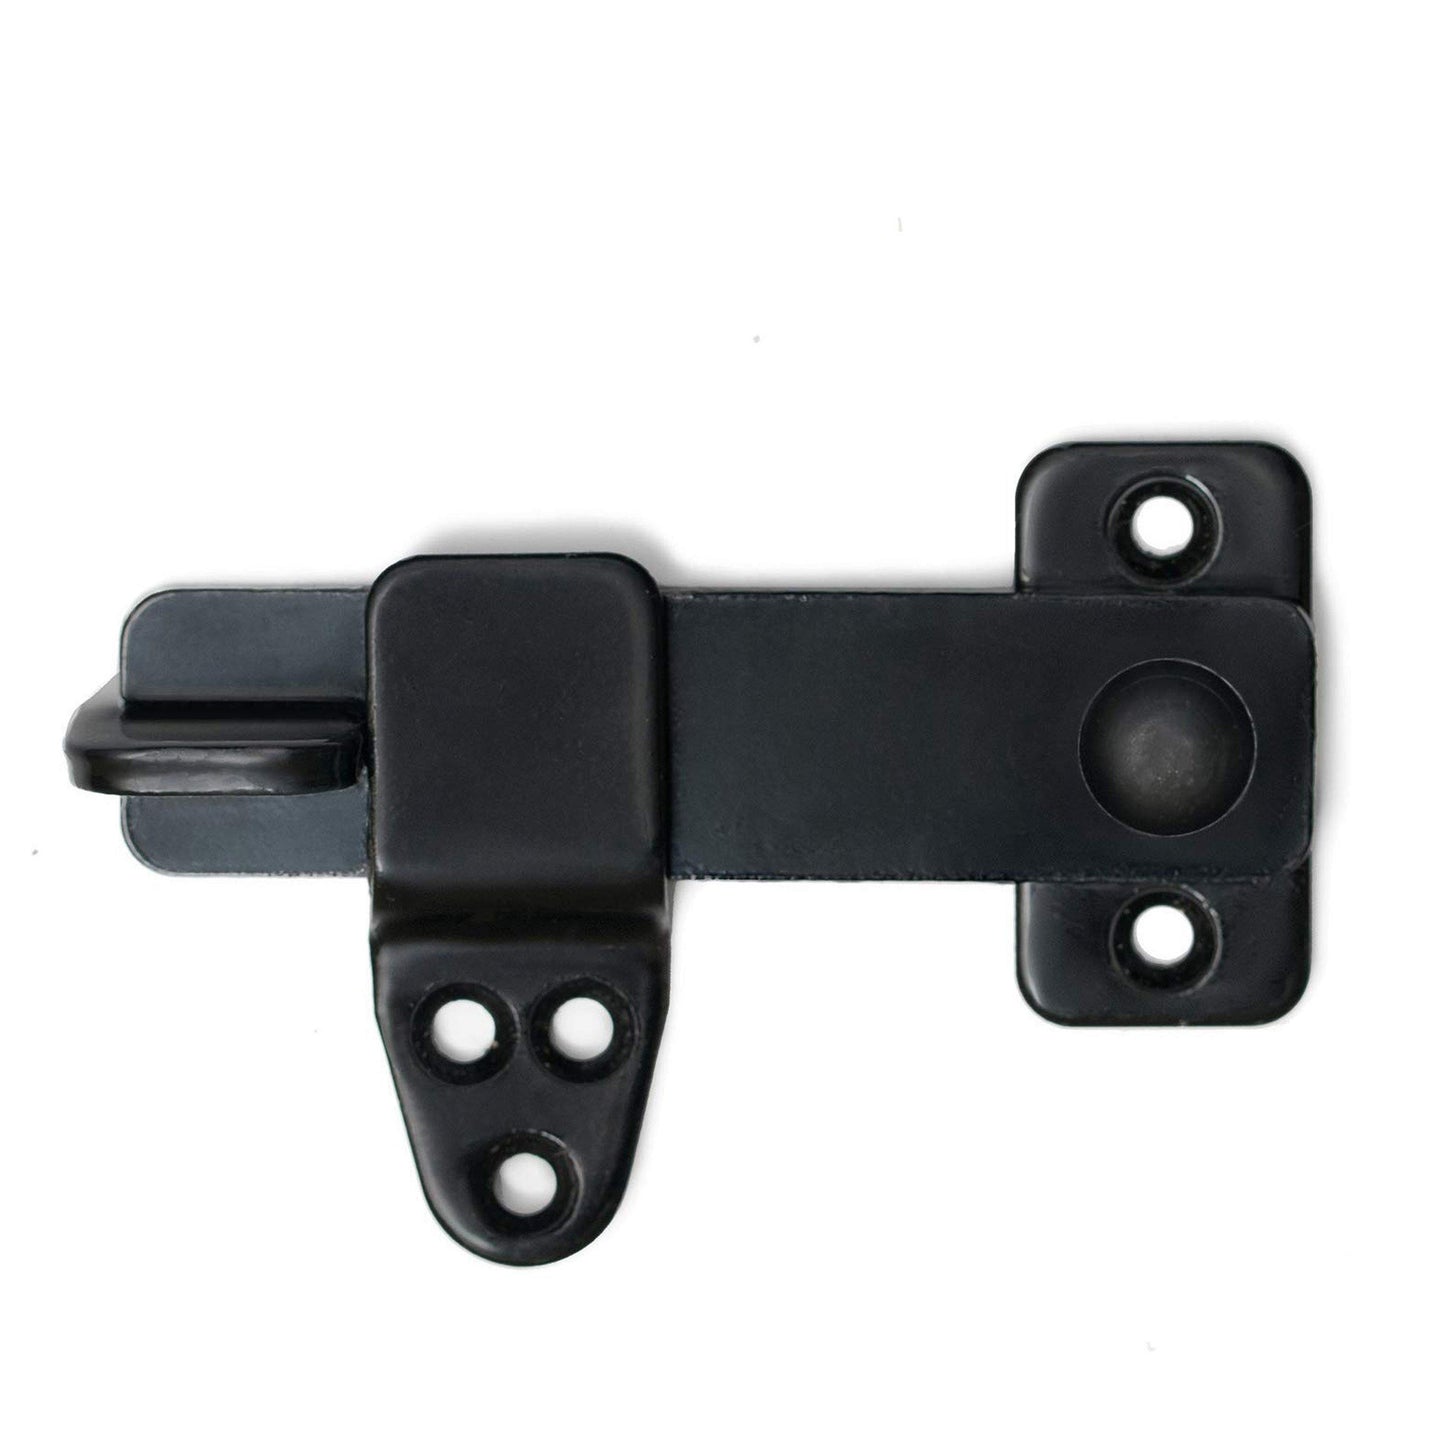 Iron Gate Latch for Closets set of 2